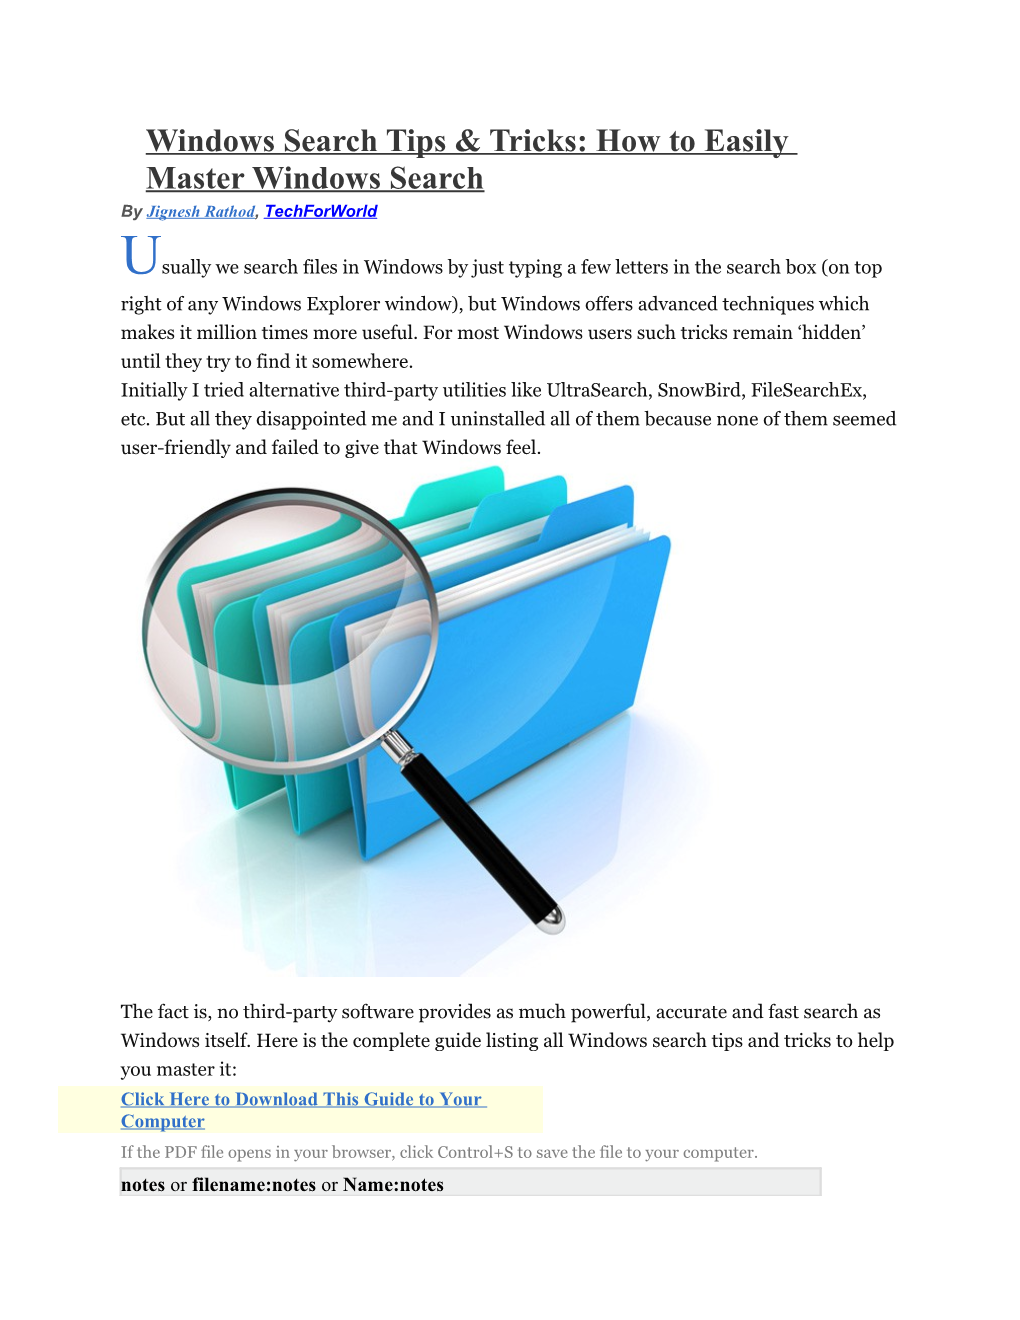 Windows Search Tips & Tricks: How to Easily Master Windows Search